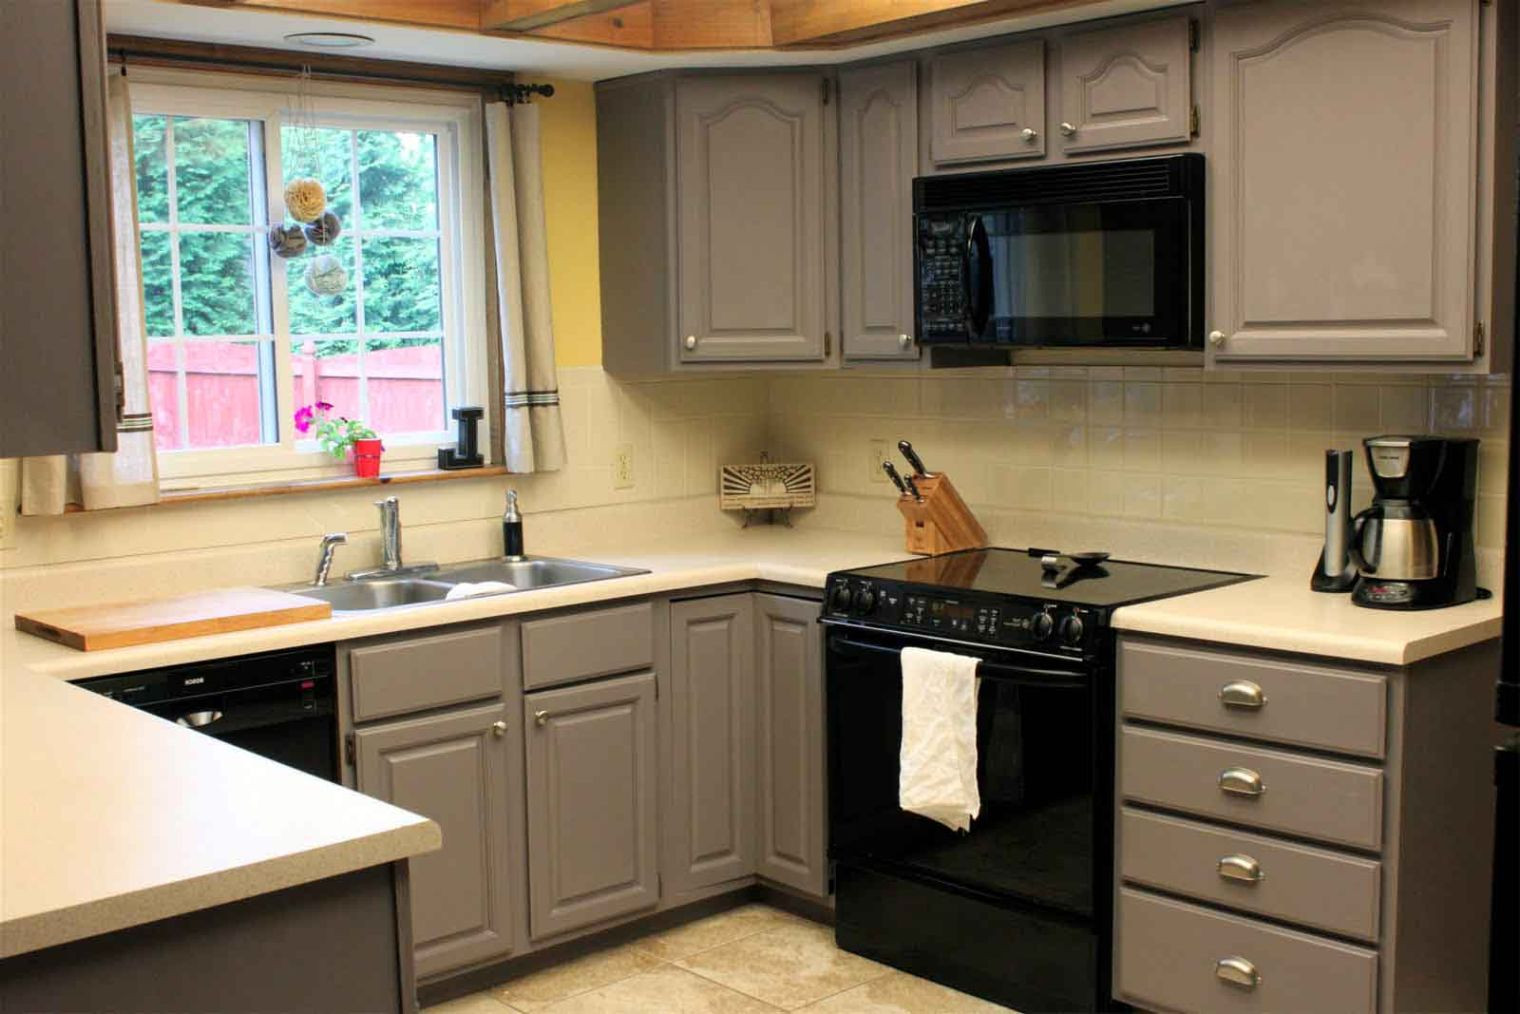 Kitchen Cabinet For Small Kitchen
 Grey painted kitchen cabinets in small kitchen space